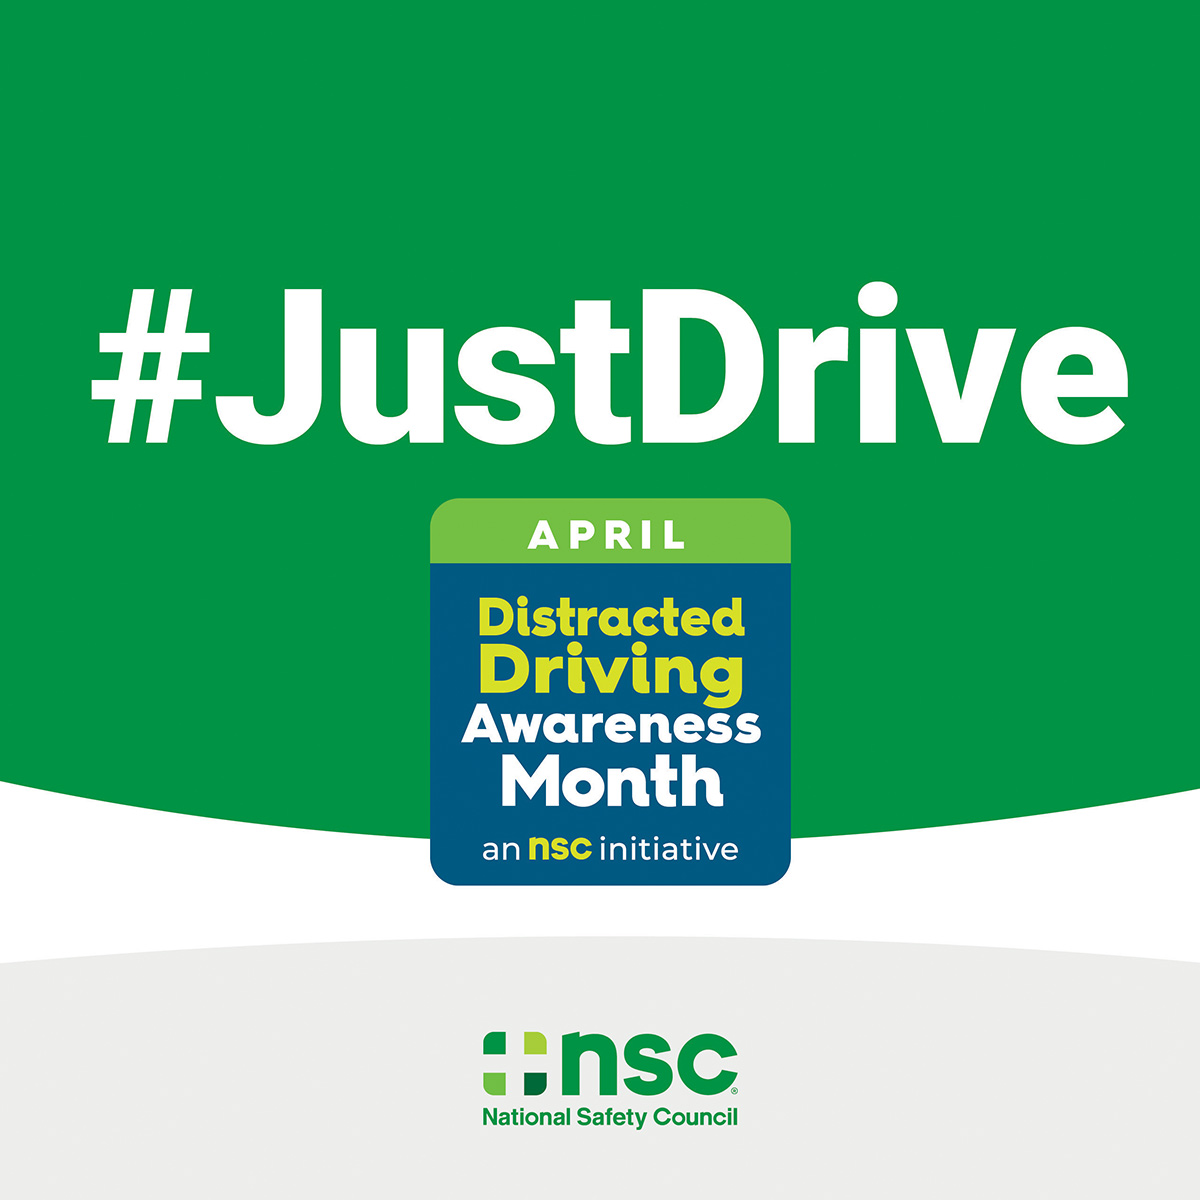 Do you know the simple steps you can take to avoid #distracteddriving? Enabling Do Not Disturb mode and taking care of texts before you drive can help #KeepEachOtherSafe. Take the @NSCsafety #JustDrive Pledge to drive distraction-free: bit.ly/NSCPledge24. #DDAM